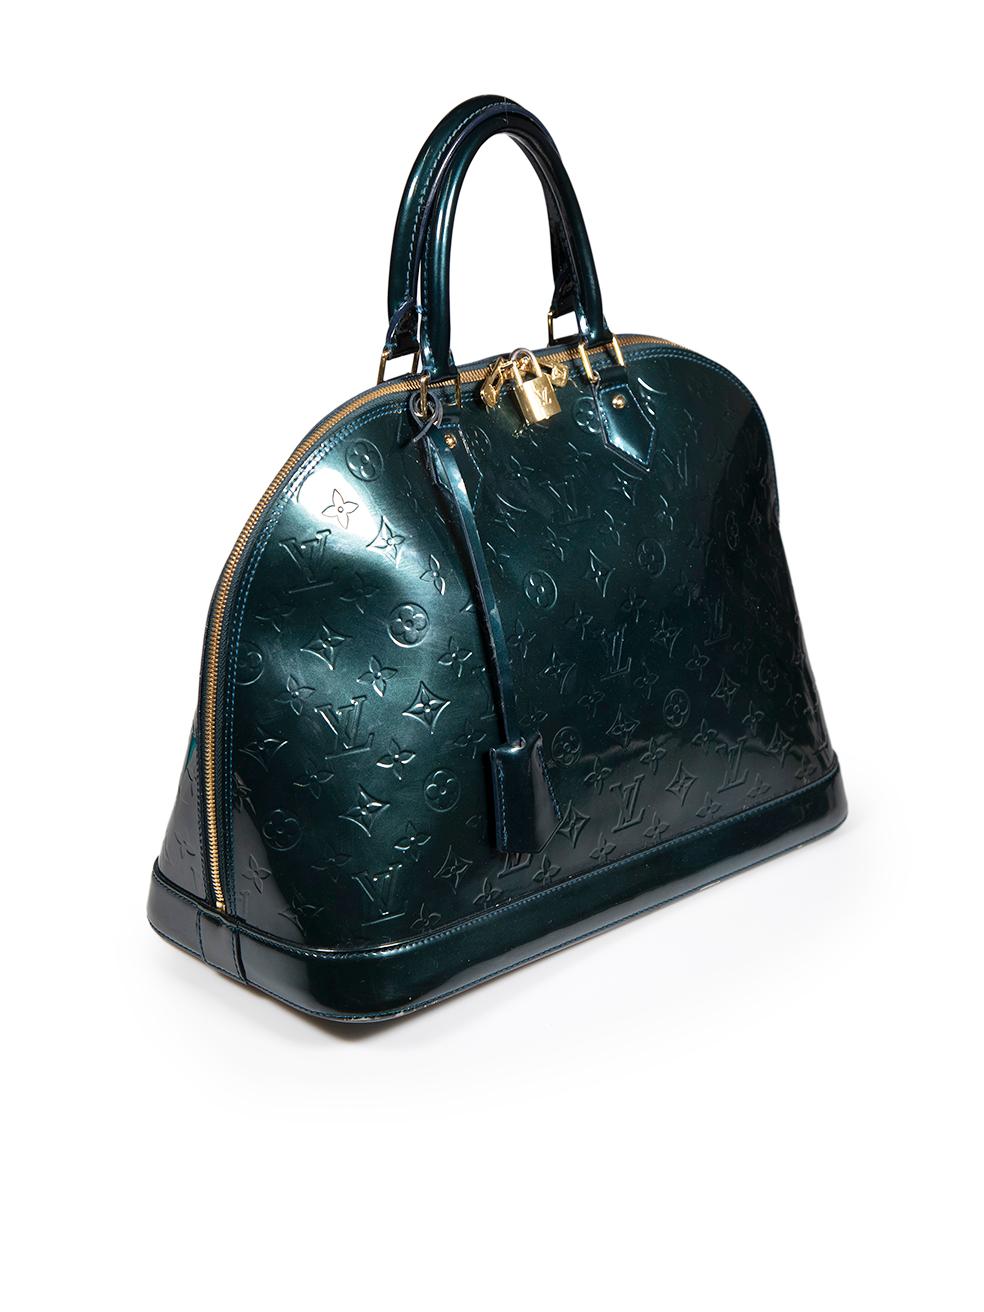 Louis Vuitton 2009 Green Patent Leather Monogram Amarante Vernis Alma GM In Good Condition For Sale In London, GB